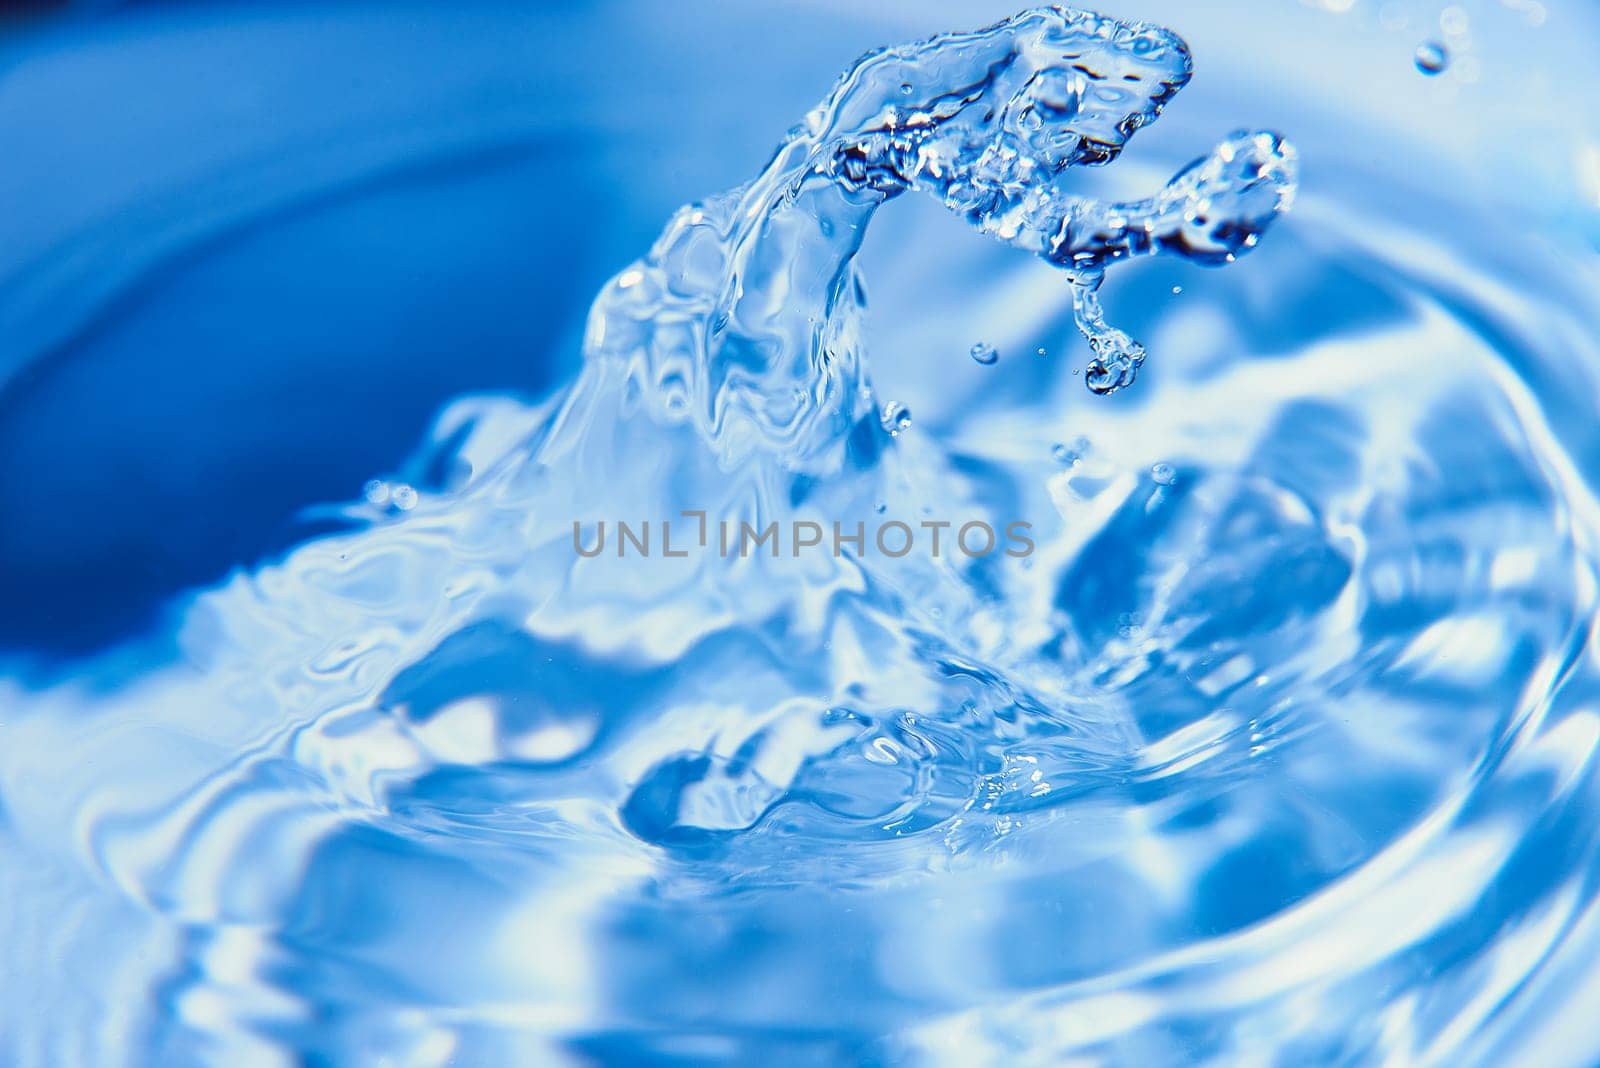 053.One or more drops of water splashing into waves and undefined shapes. Wallpaper by raul_ruiz